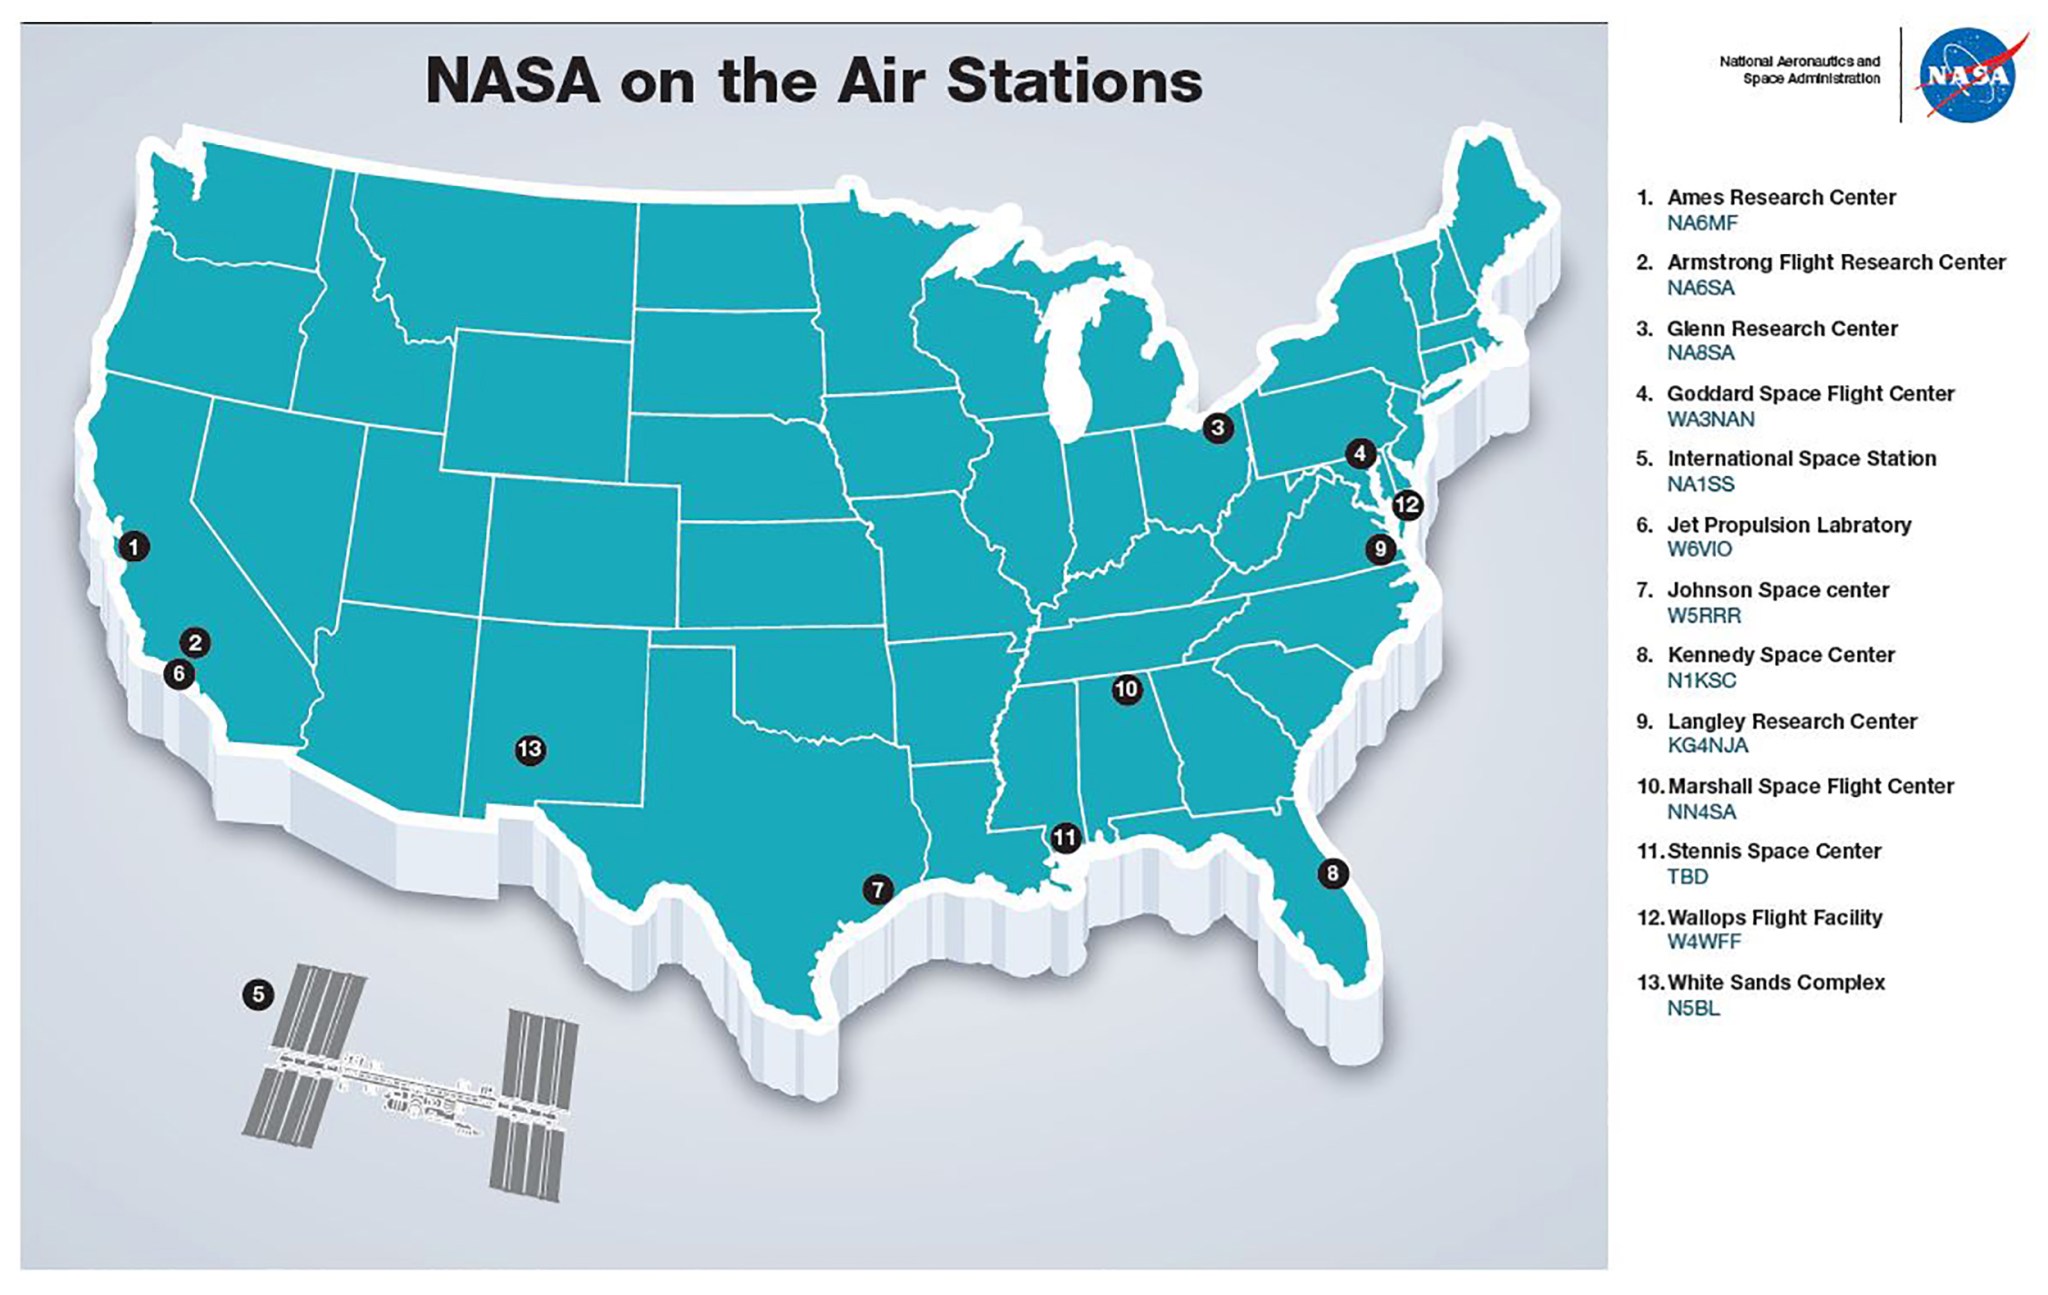 Amateur Radio Clubs at NASA Centers Across the Nation